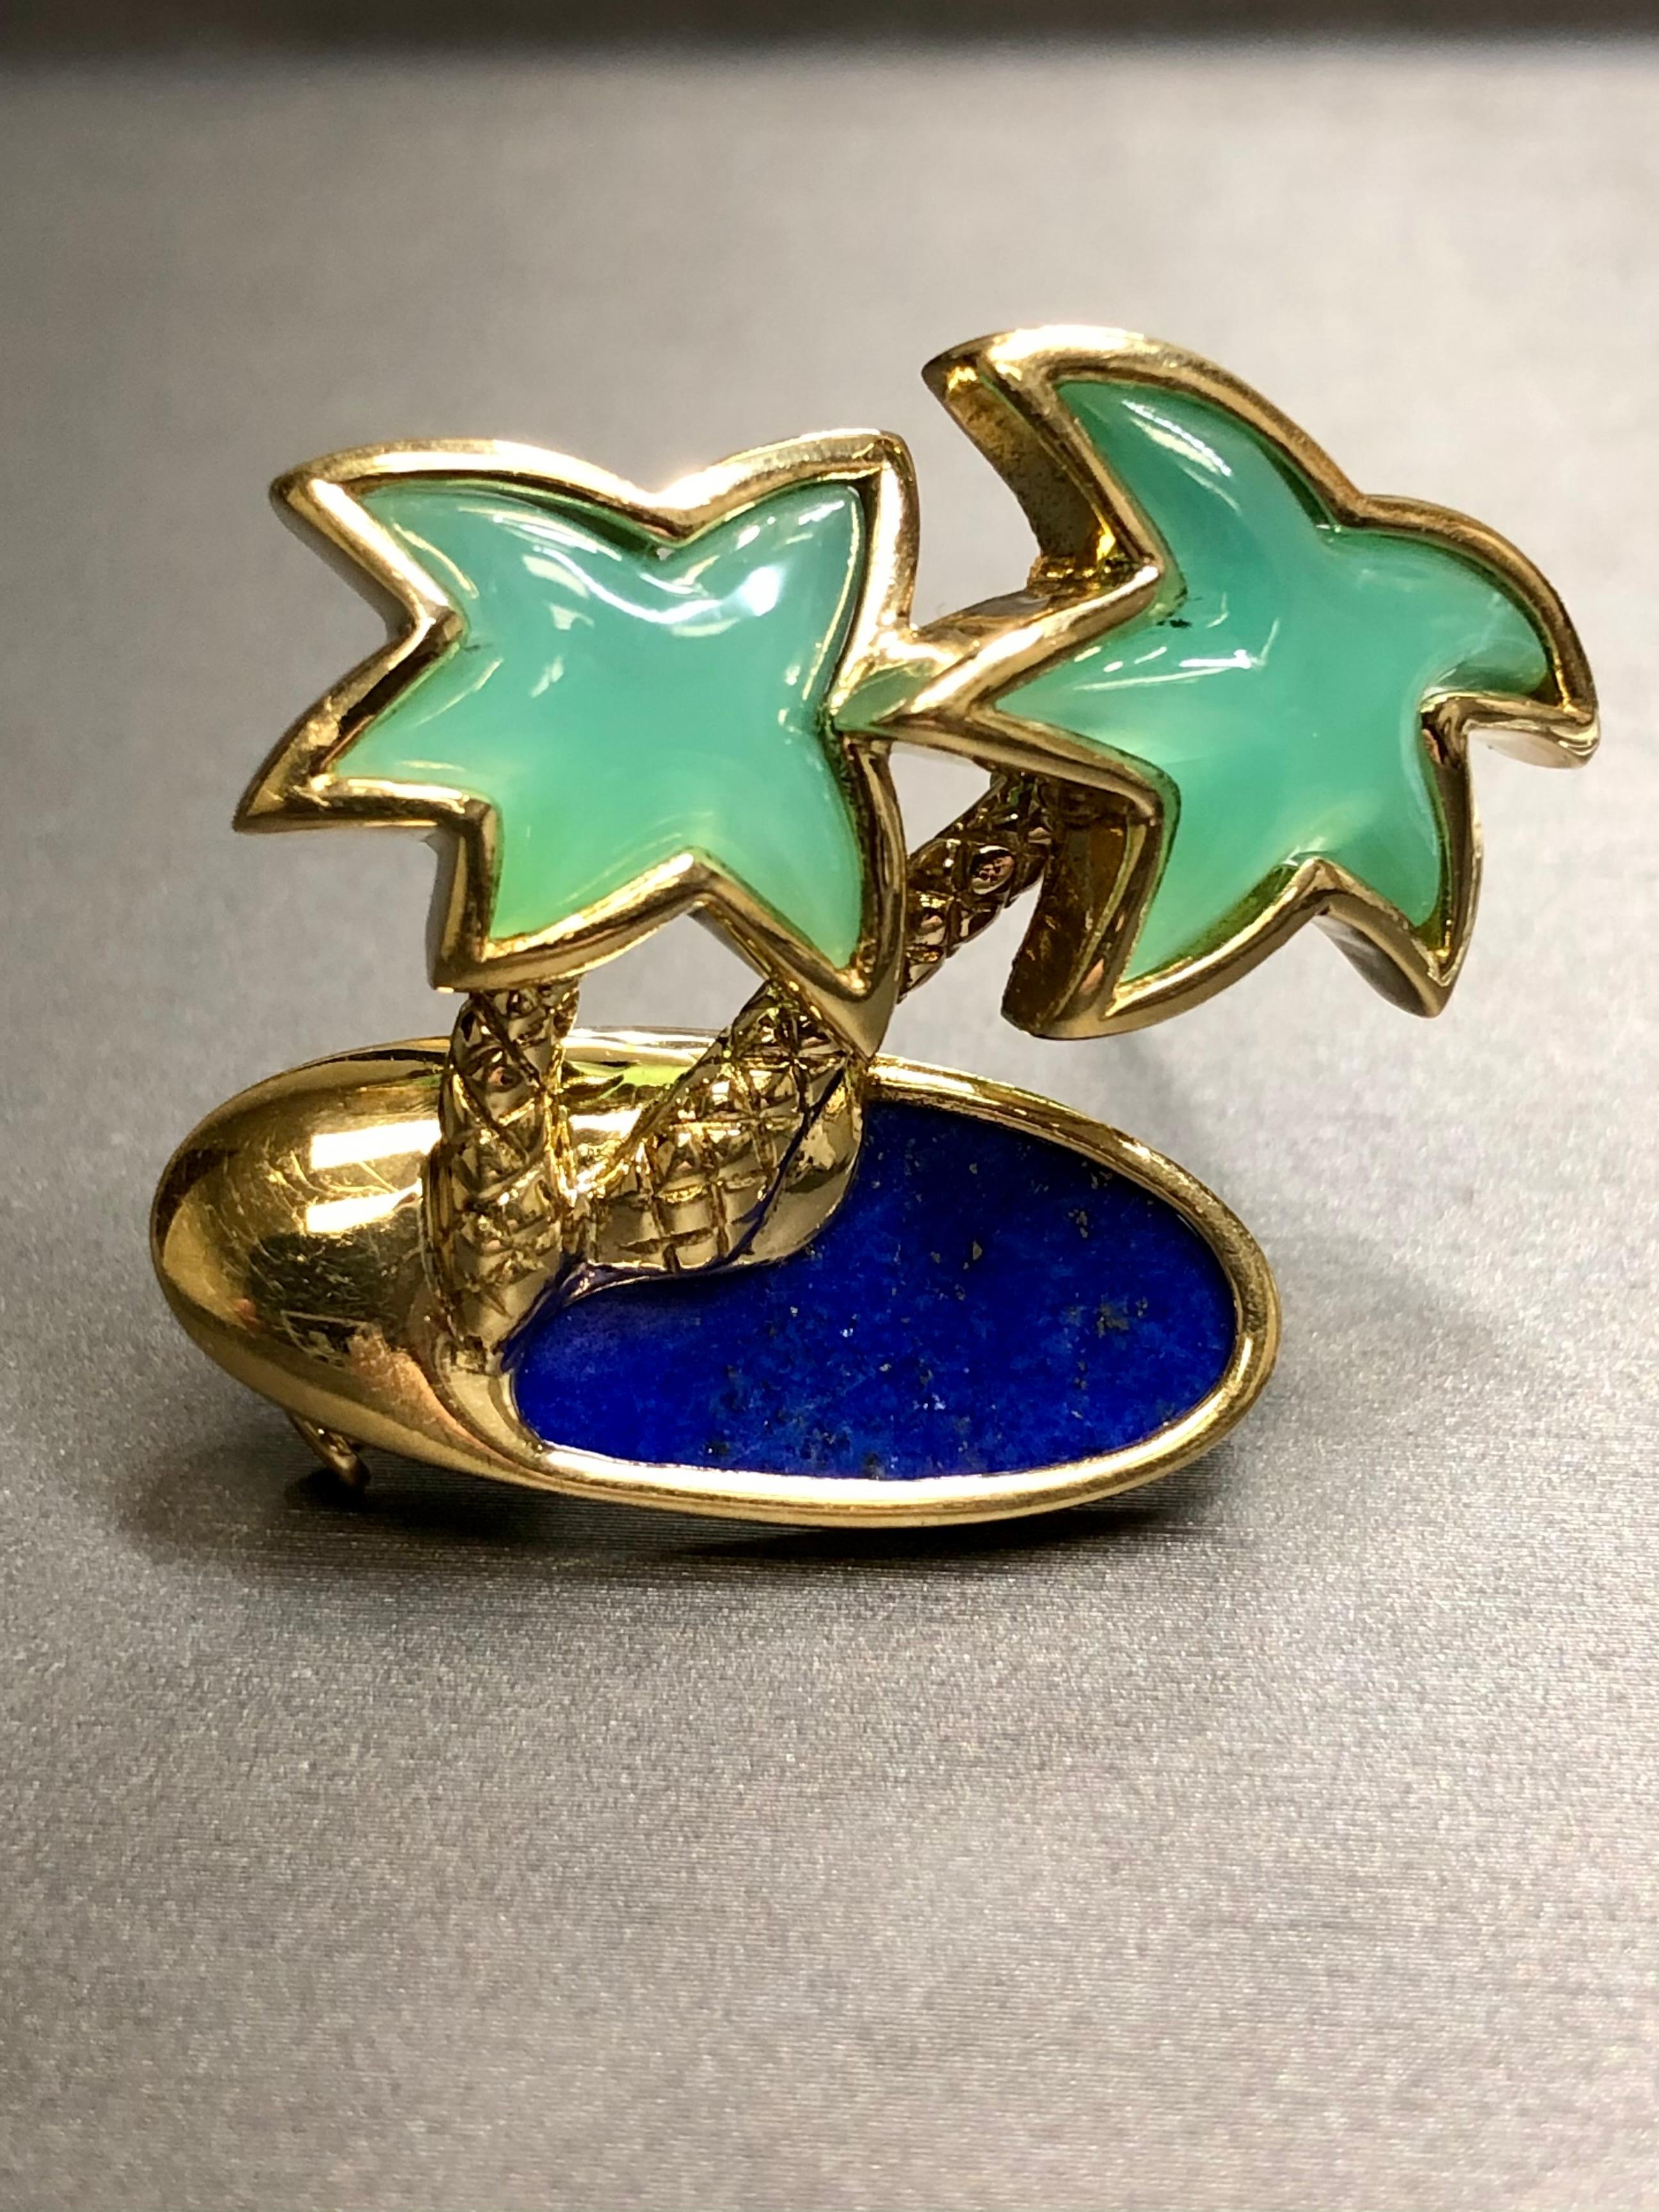 
A whimsical beach scene brooch by Fred of Paris handmade in 18K yellow gold and set with chrysoprase and lapis.


Dimensions/Weight:

Pin measures 1.25” tall by 1.40” wide and weighs 15.2g.


Condition:

Stones are secure and in good condition.